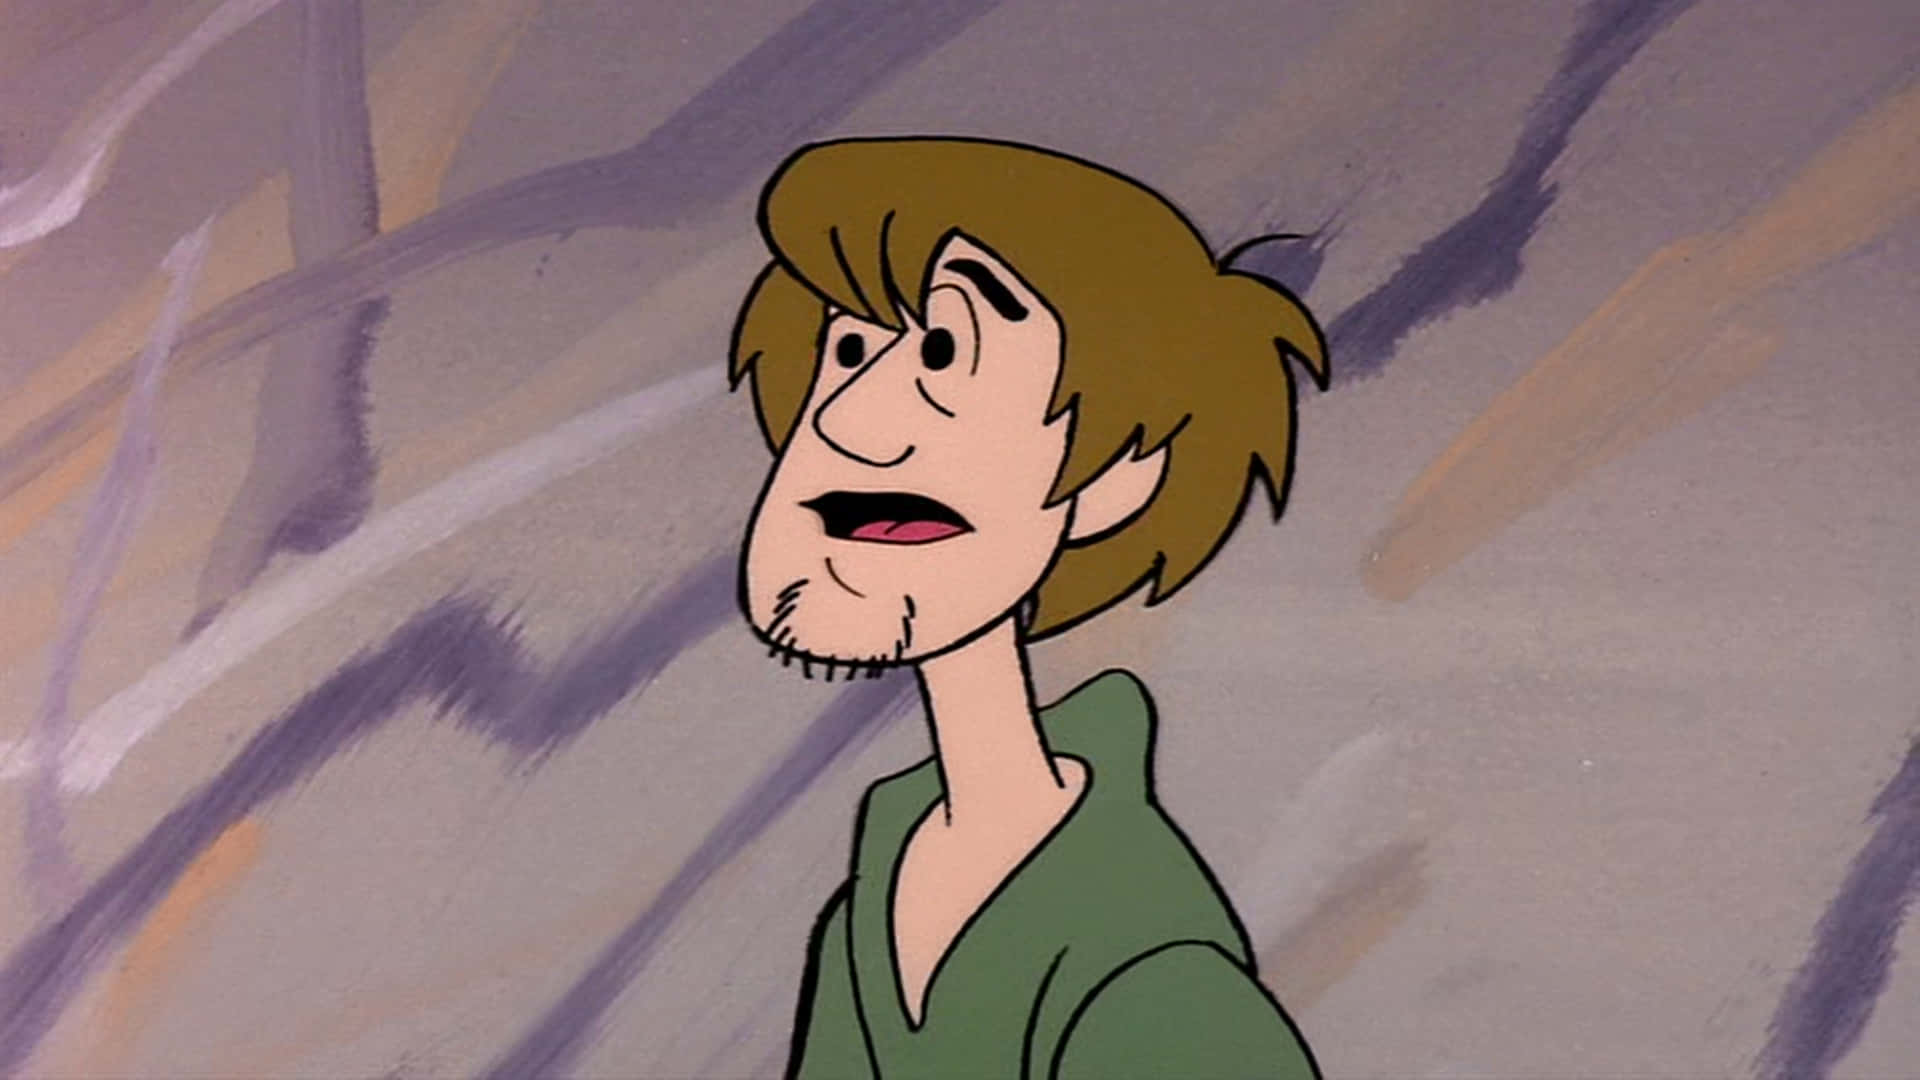 A Cartoon Character With Brown Hair And A Green Shirt Wallpaper